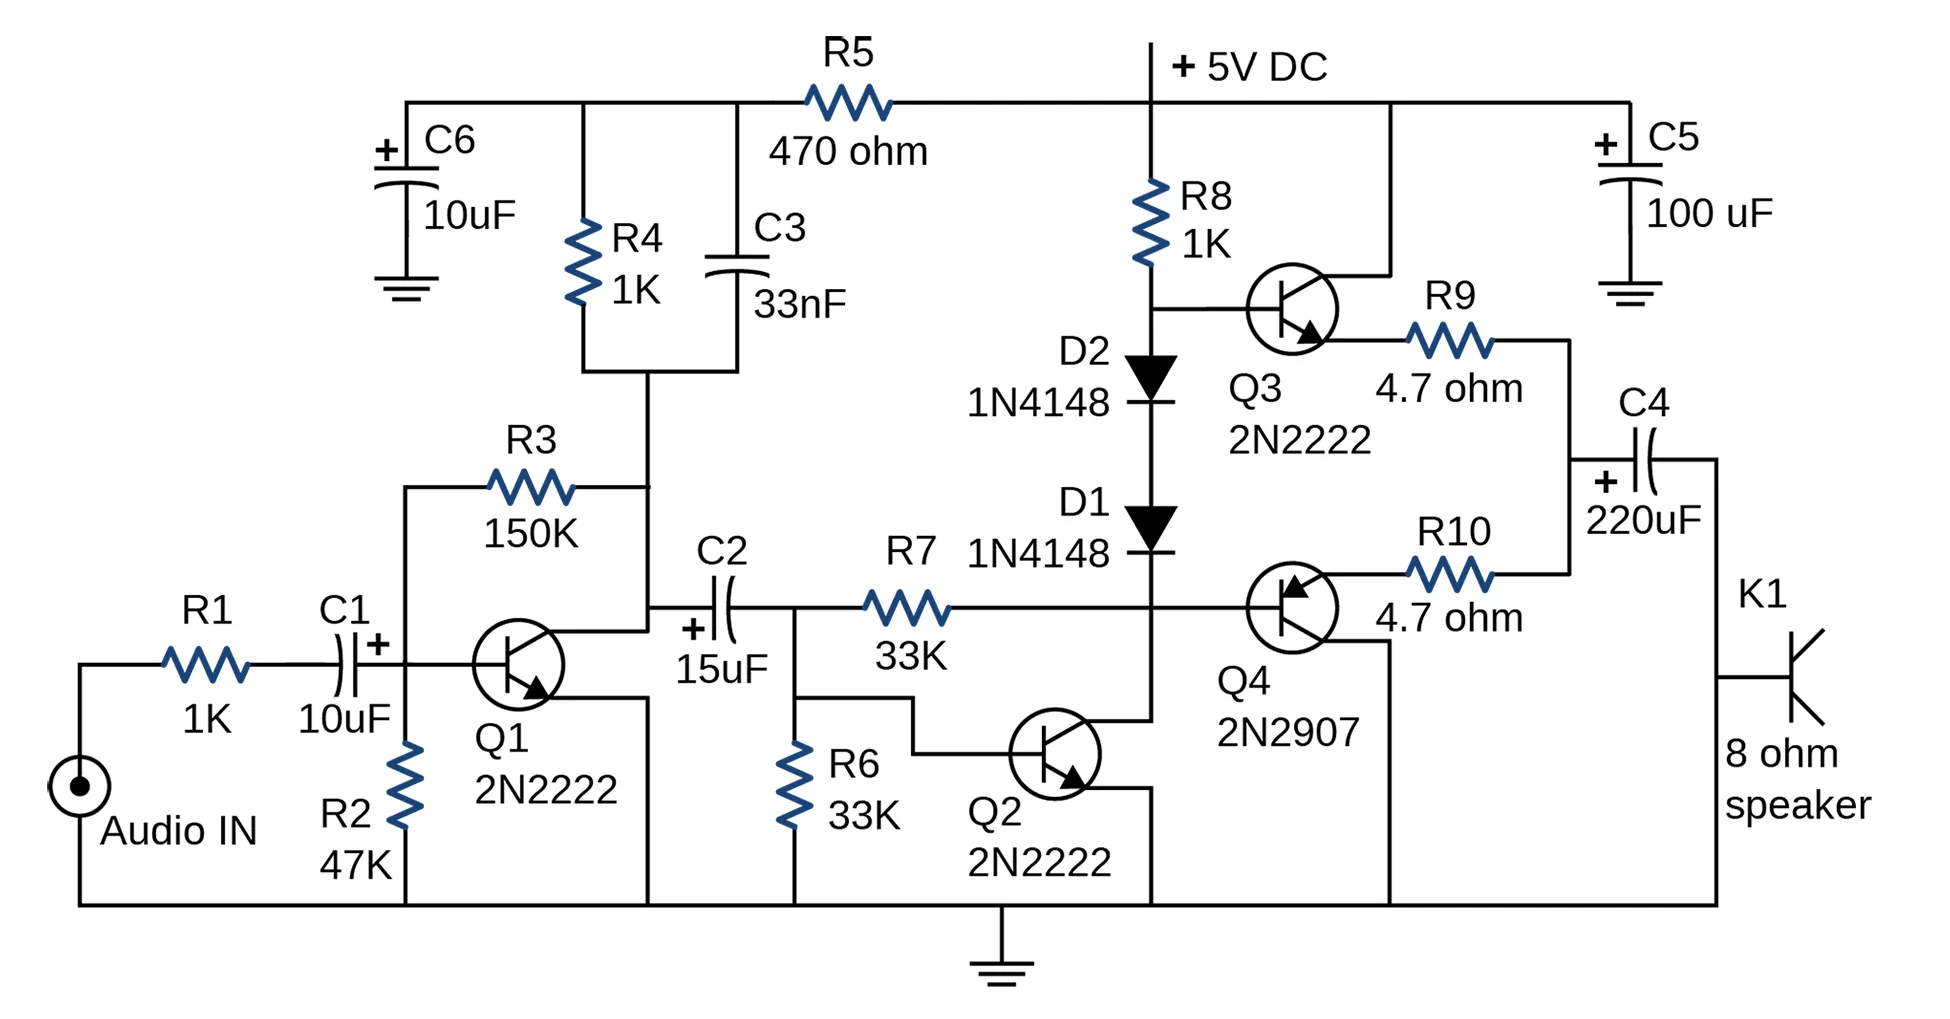 The figure shows the circuit diagram used to amplify signals and power headphones.